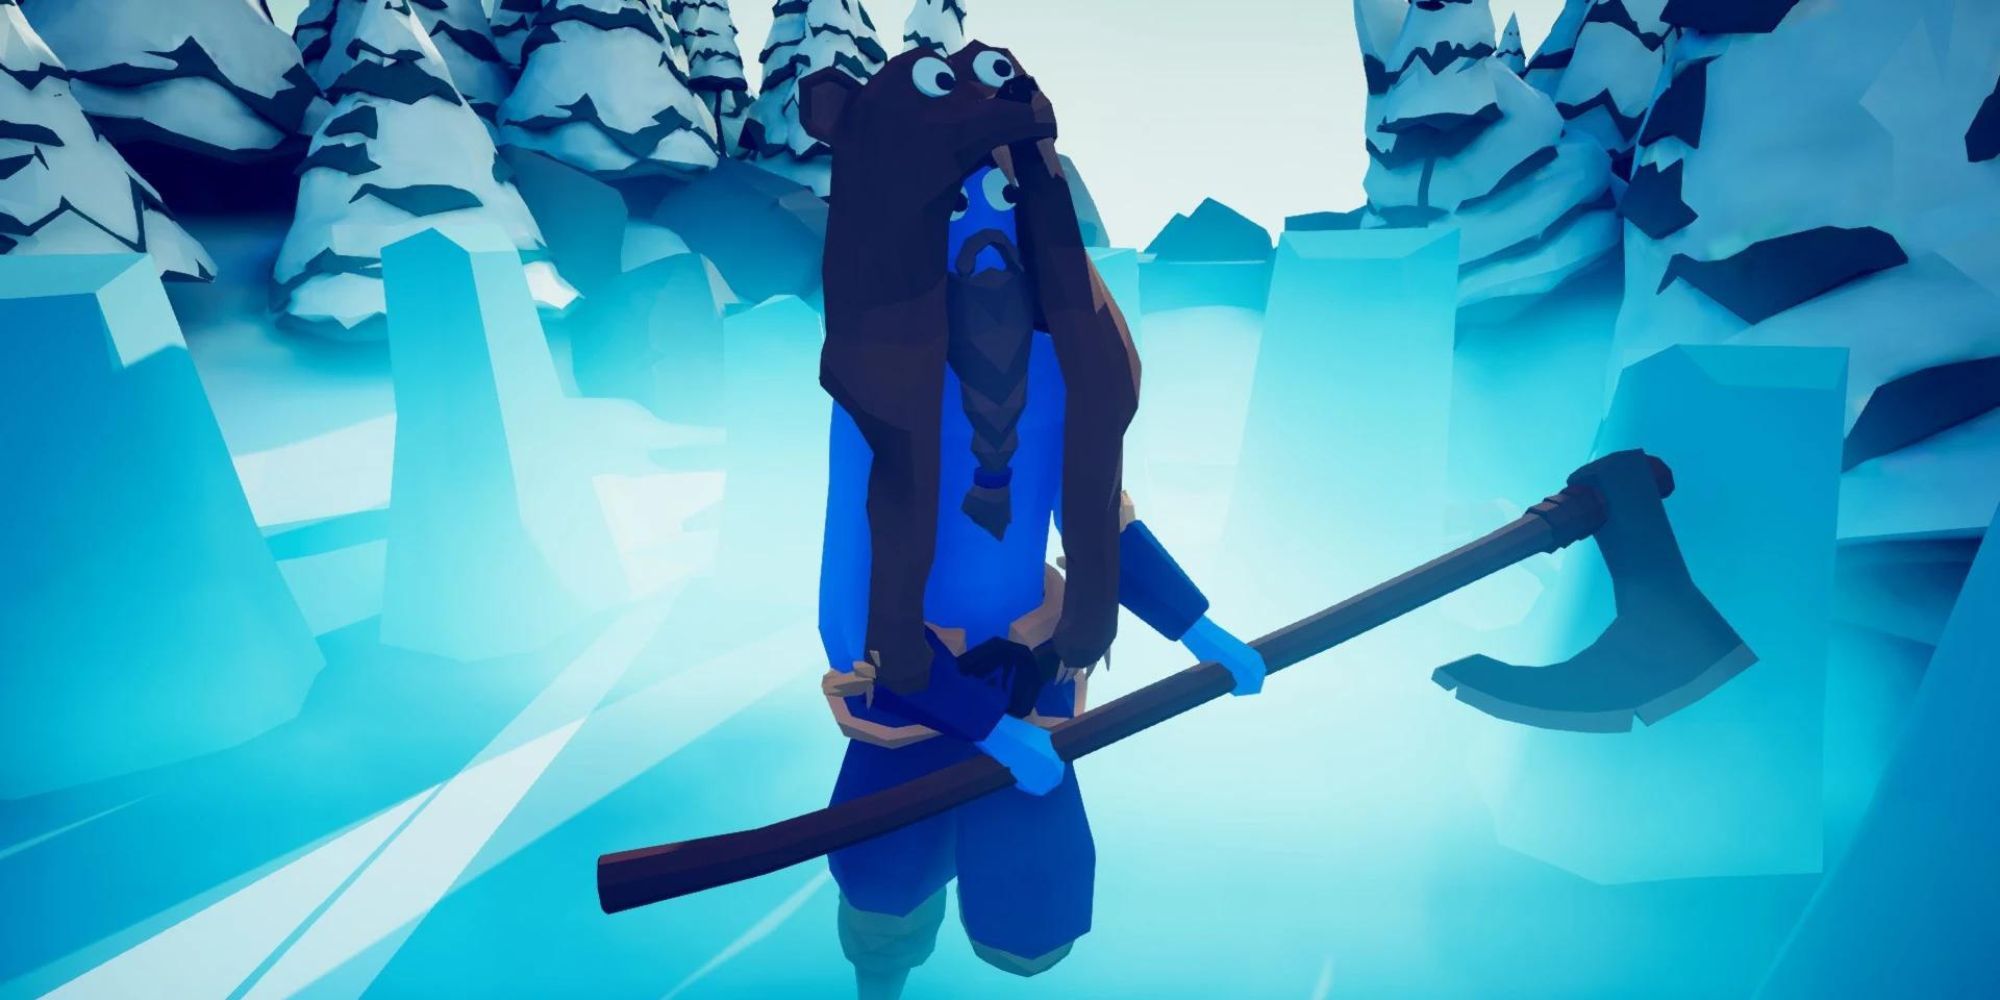 A blue Jarl holding an axe in Totally Accurate Battle Simulator